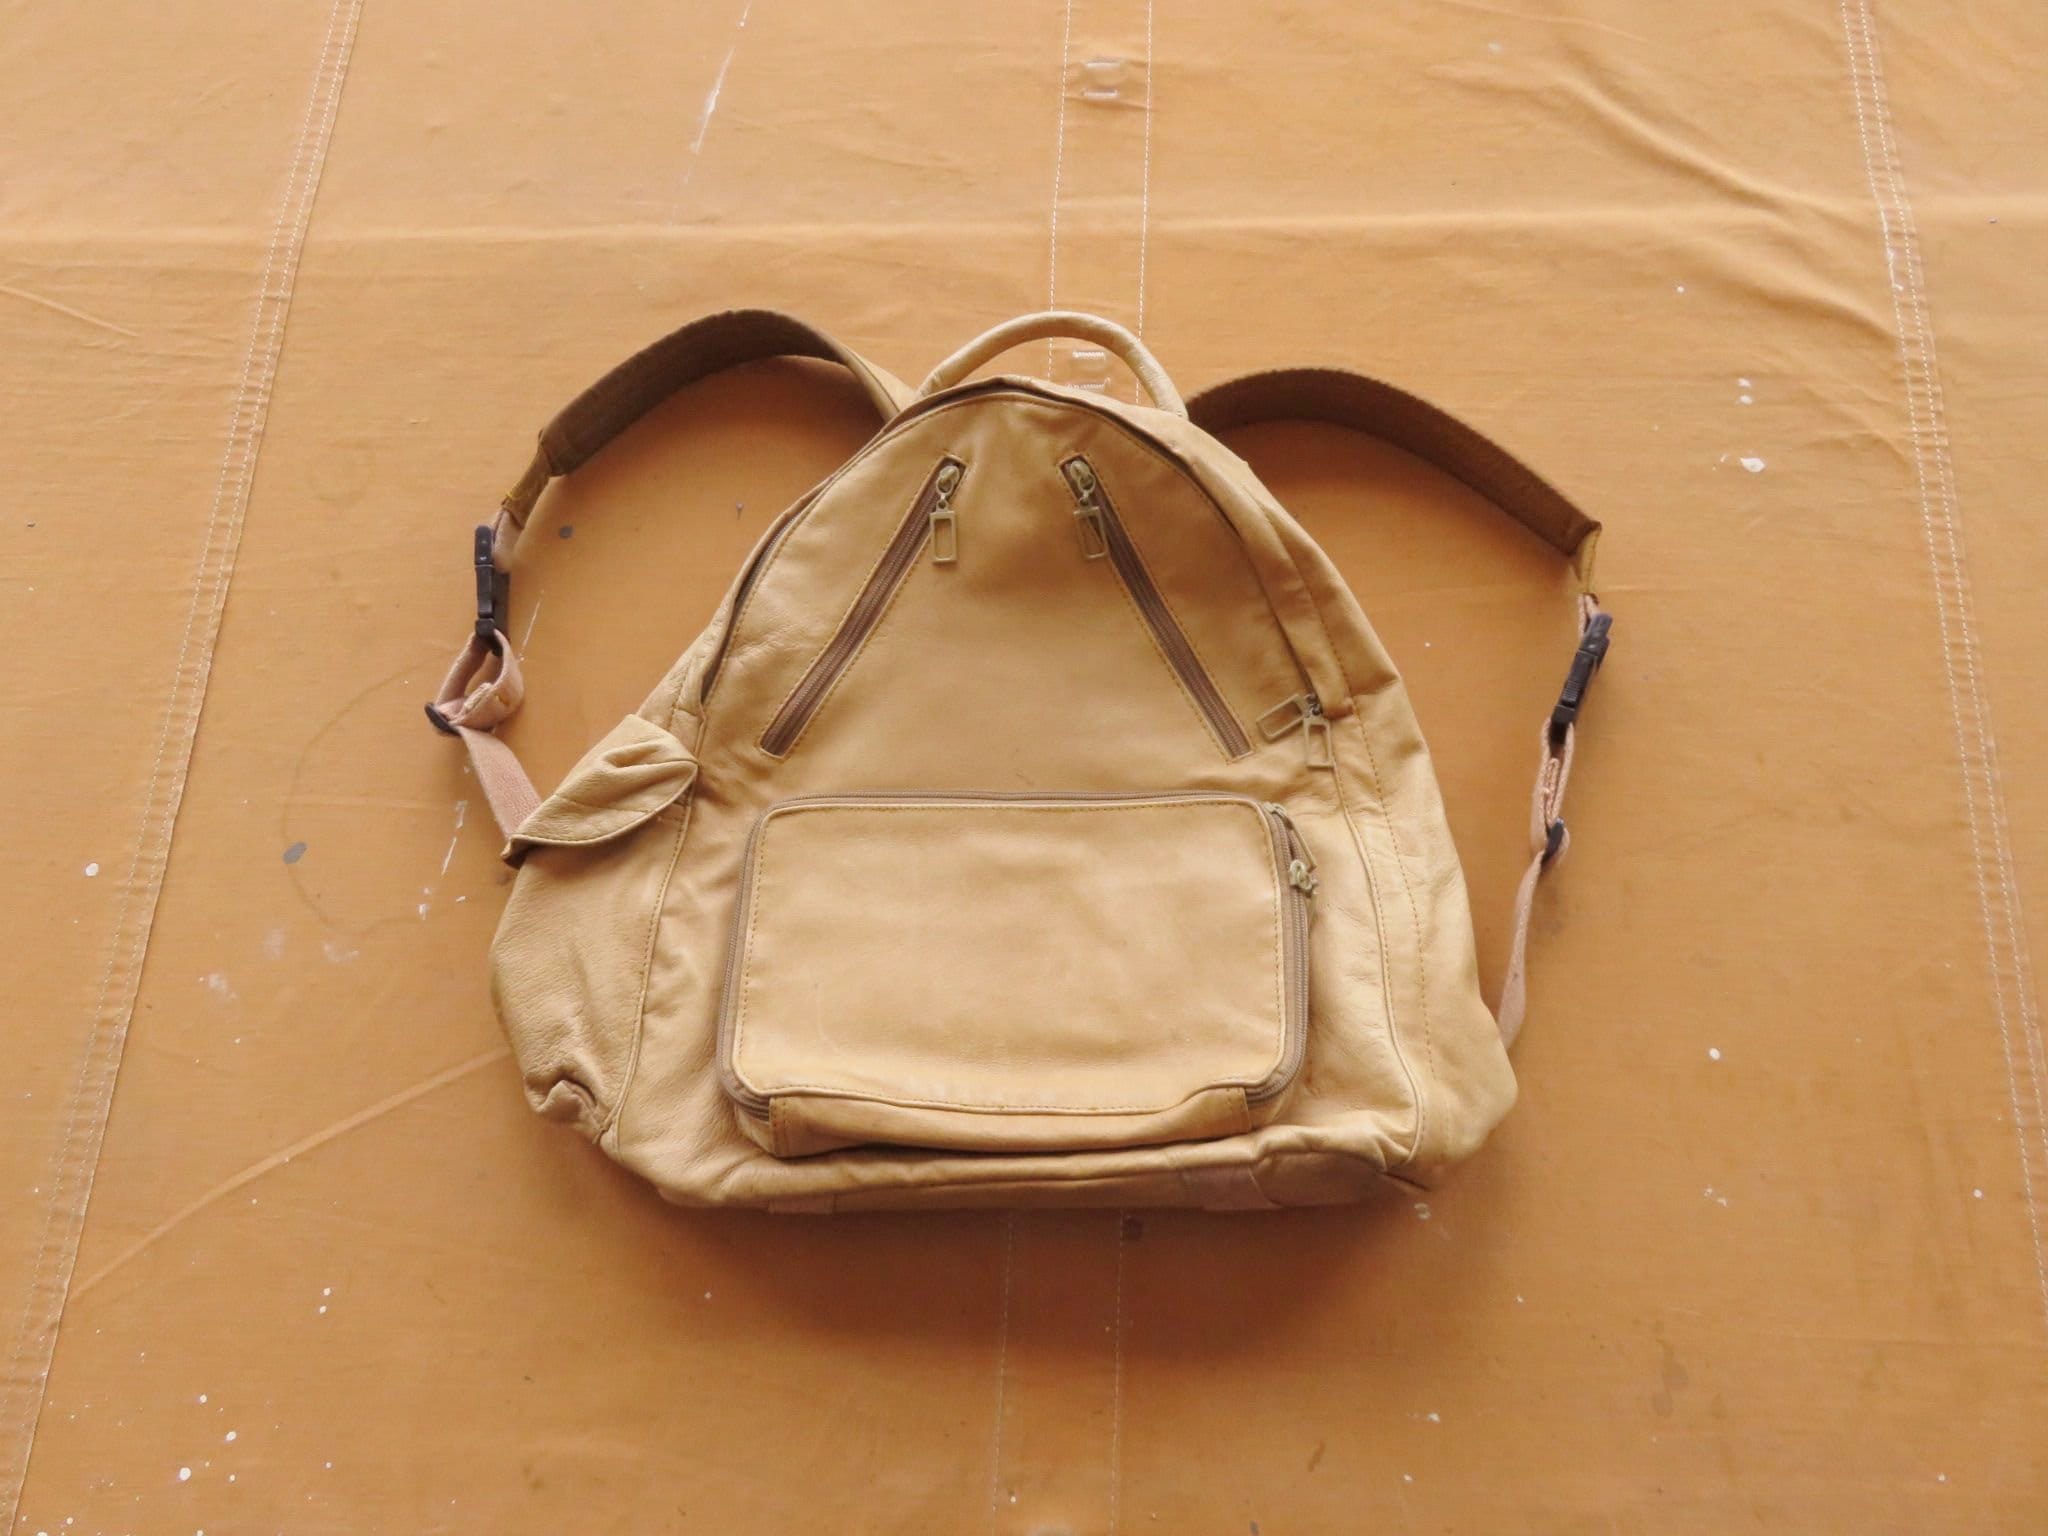 Cream Black Vegan Leather and Knit Material Backpack